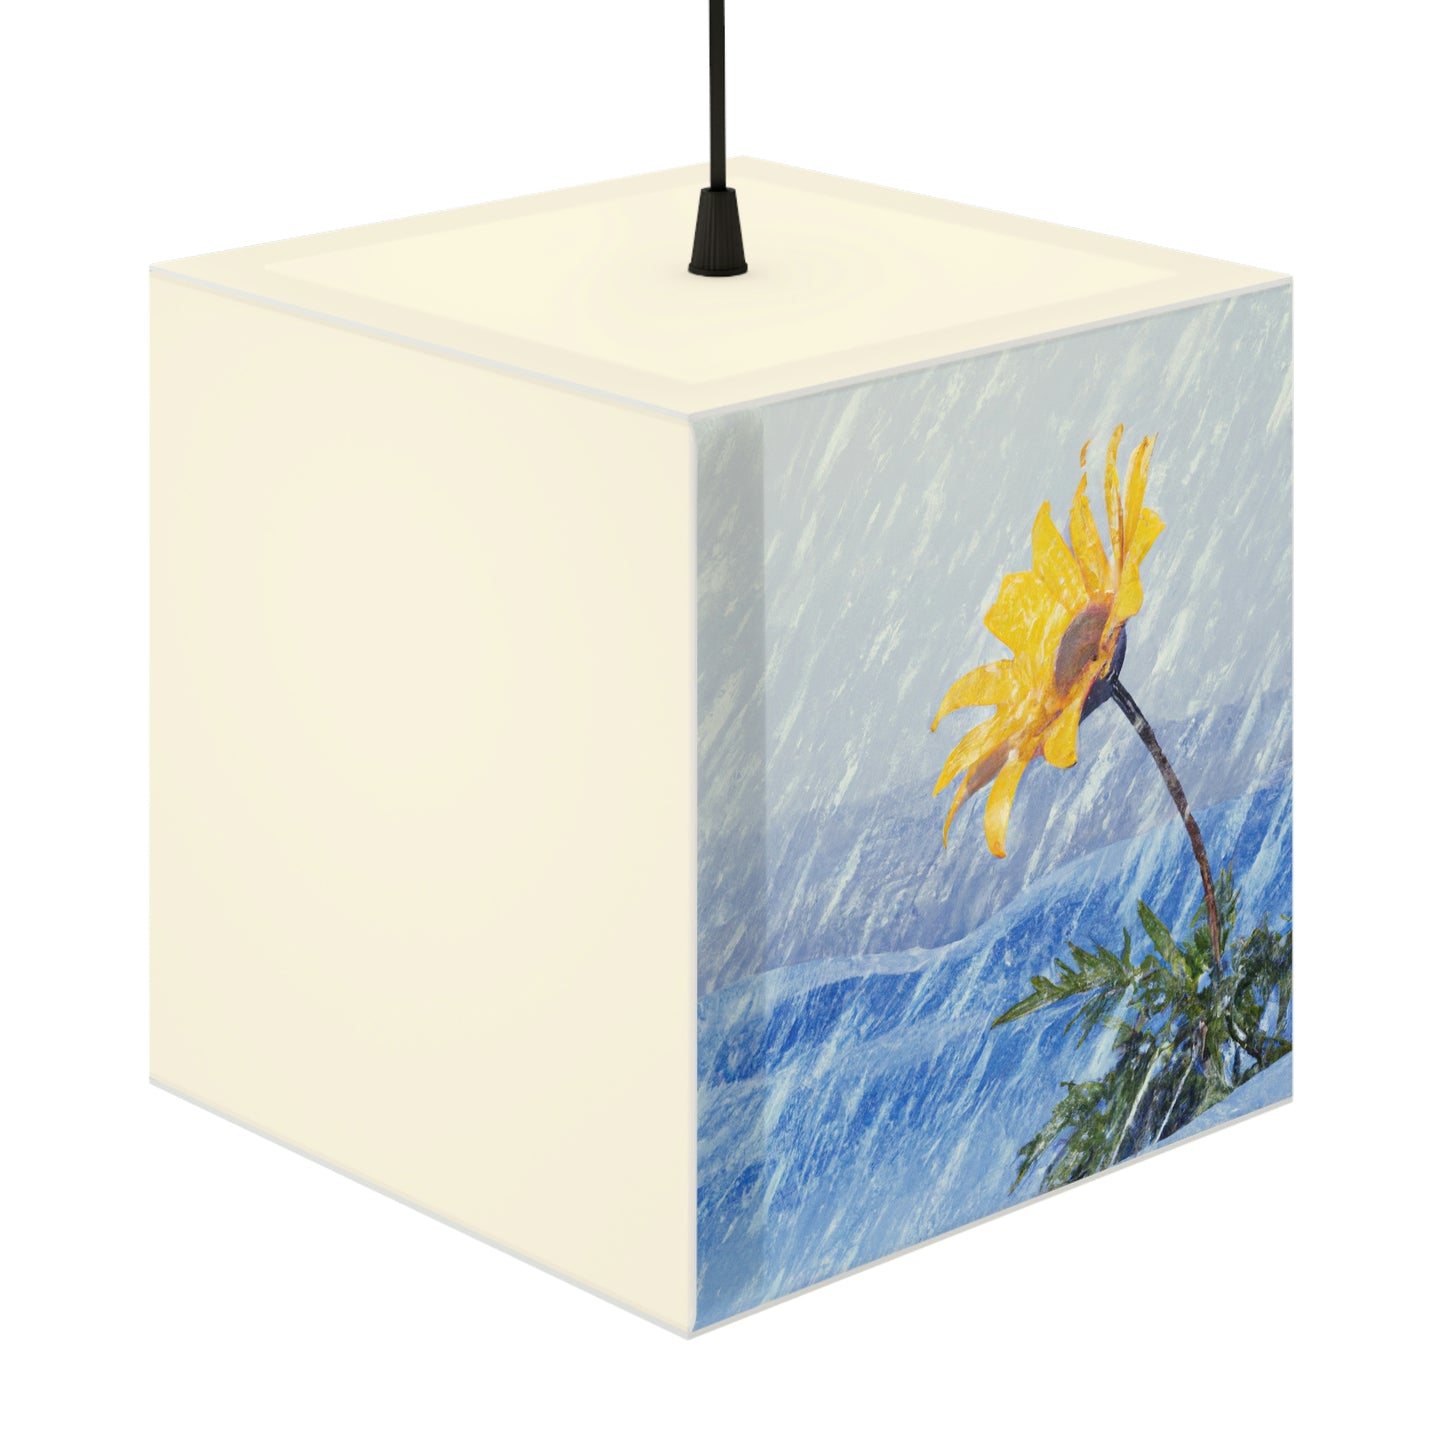 "A Burst of Color in the Glistening White: The Miracle of a Flower Blooms in a Snowstorm" - The Alien Light Cube Lamp